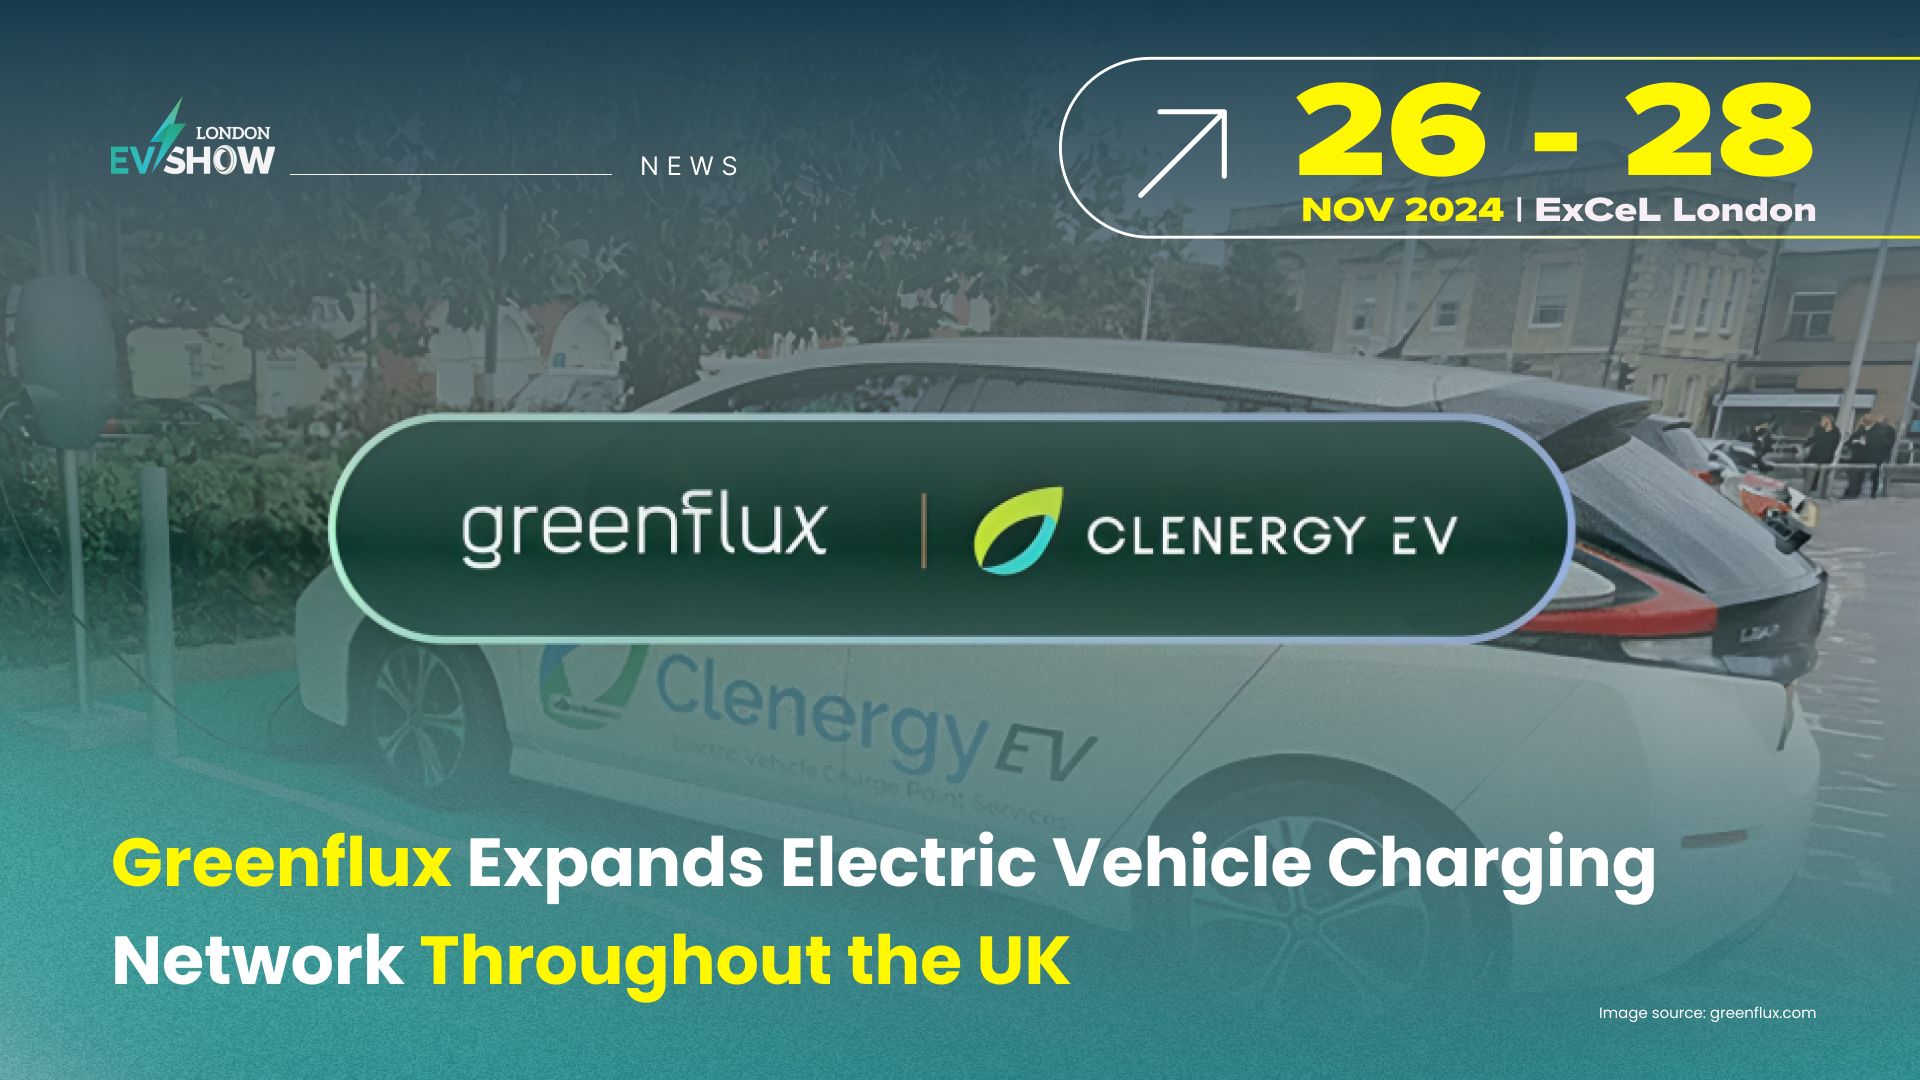 Greenflux Expands Electric Vehicle Charging Network Throughout the UK